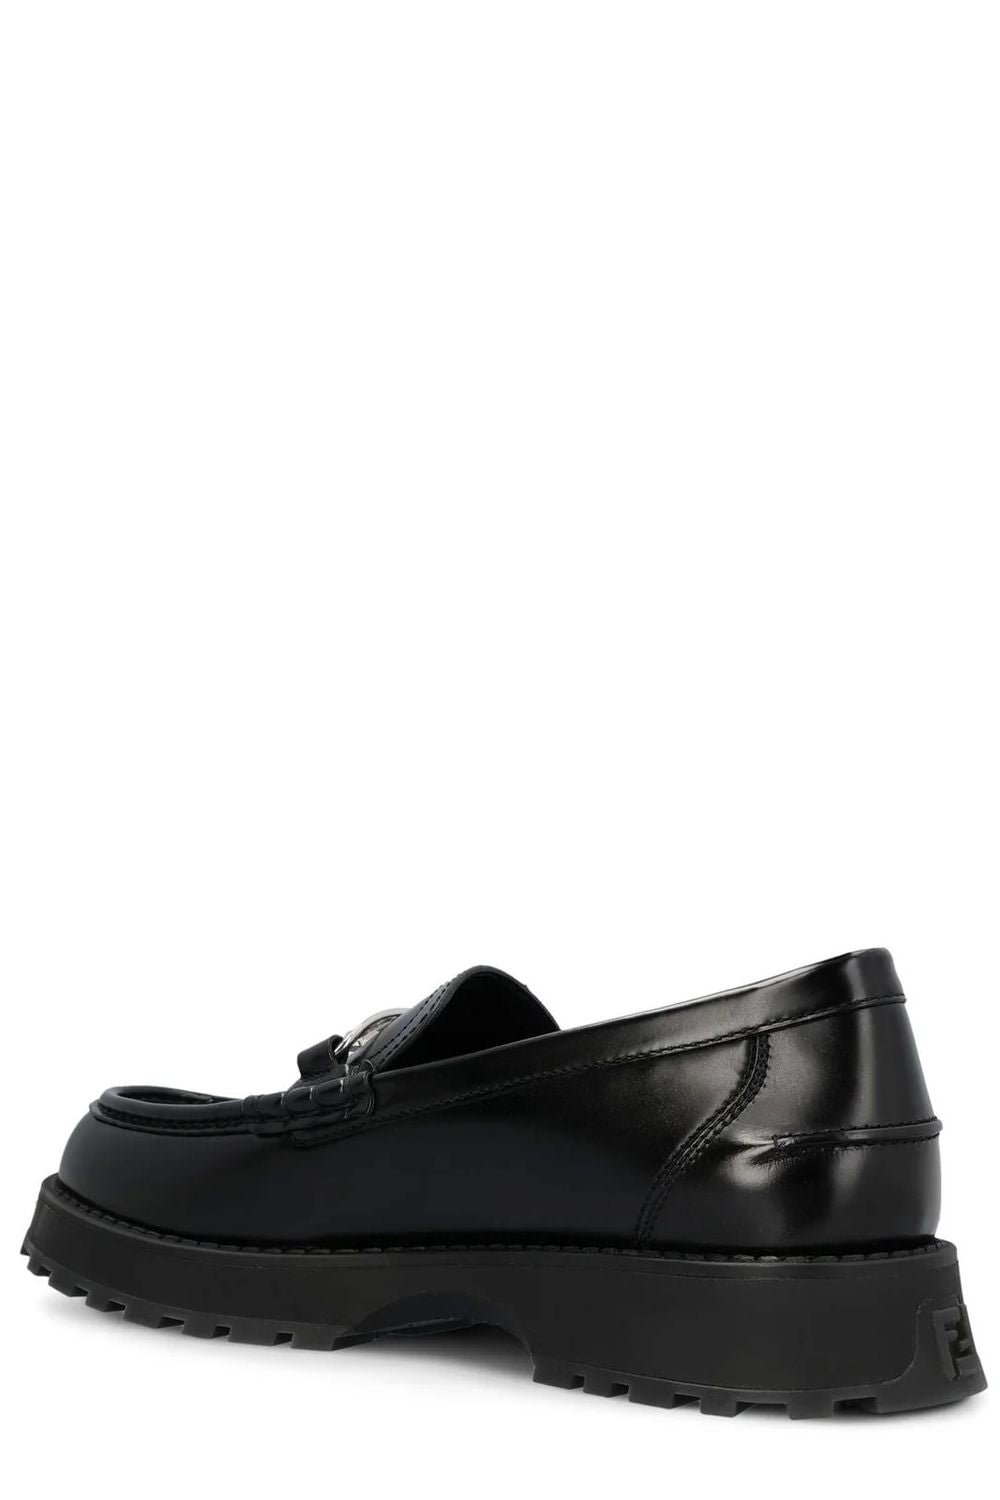 FENDI Sleek Smooth Leather O'Lock Loafers for Men in Black for FW23